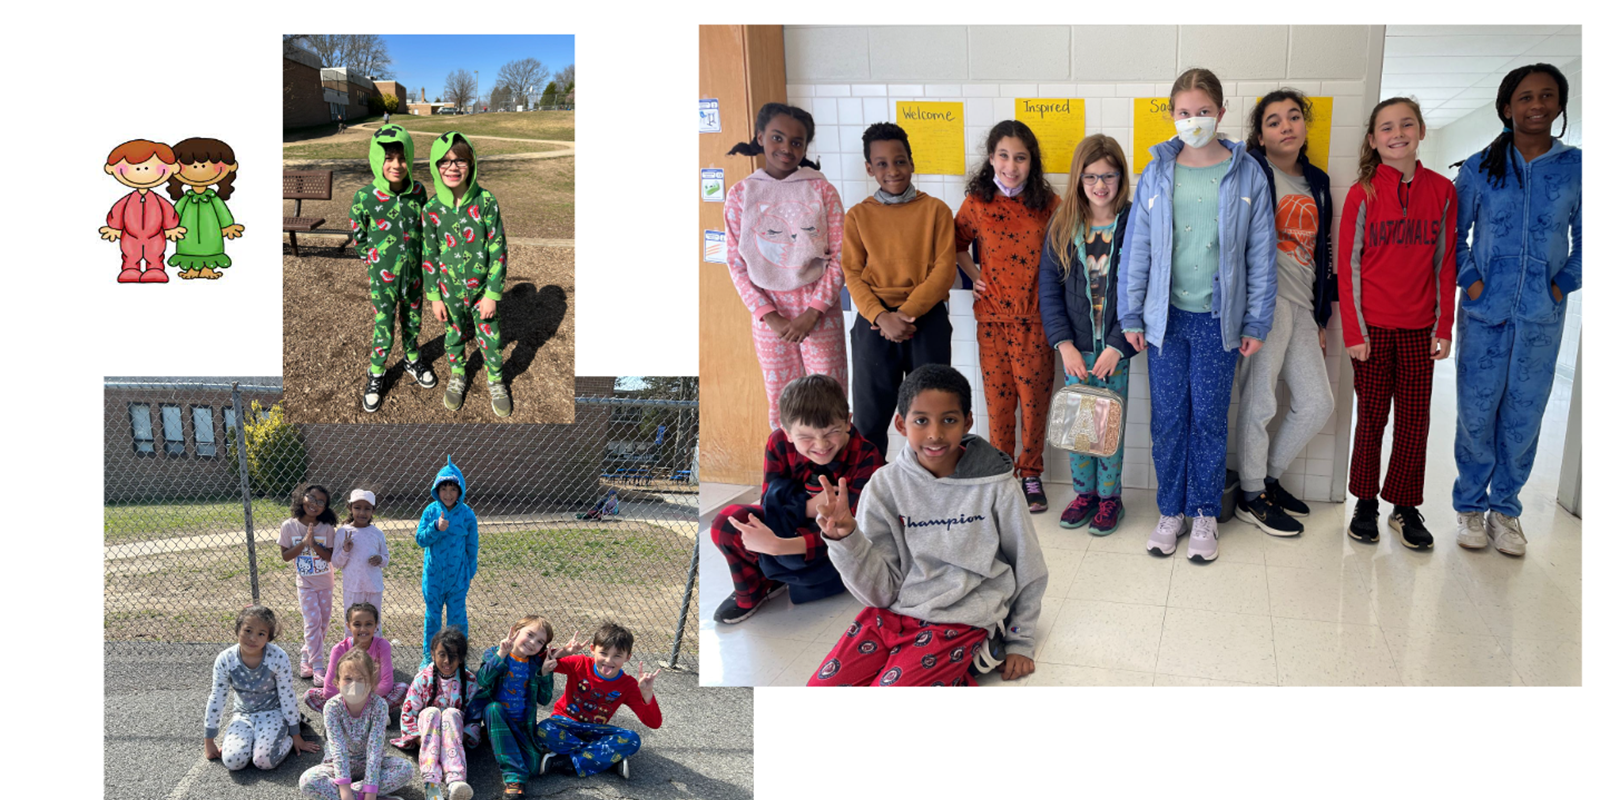 Students in pajamas